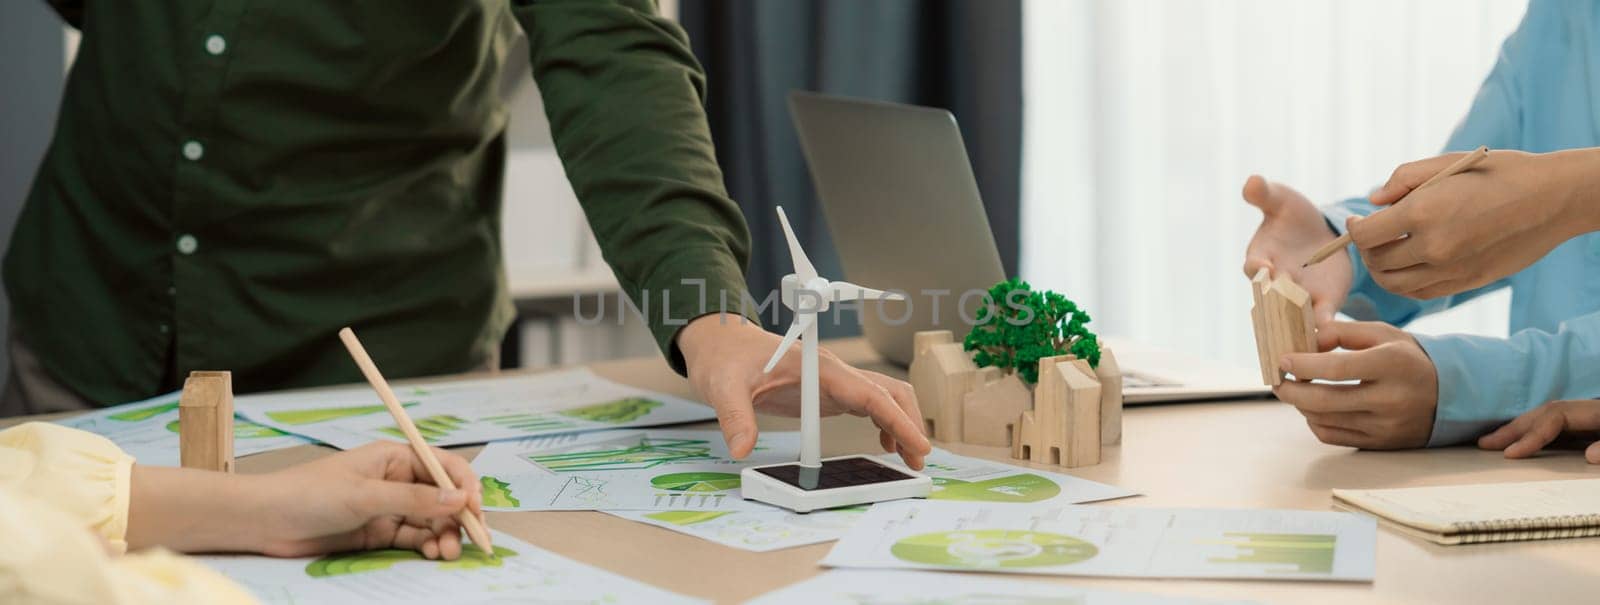 Windmill model placed on green business meeting table. Front view. Delineation. by biancoblue